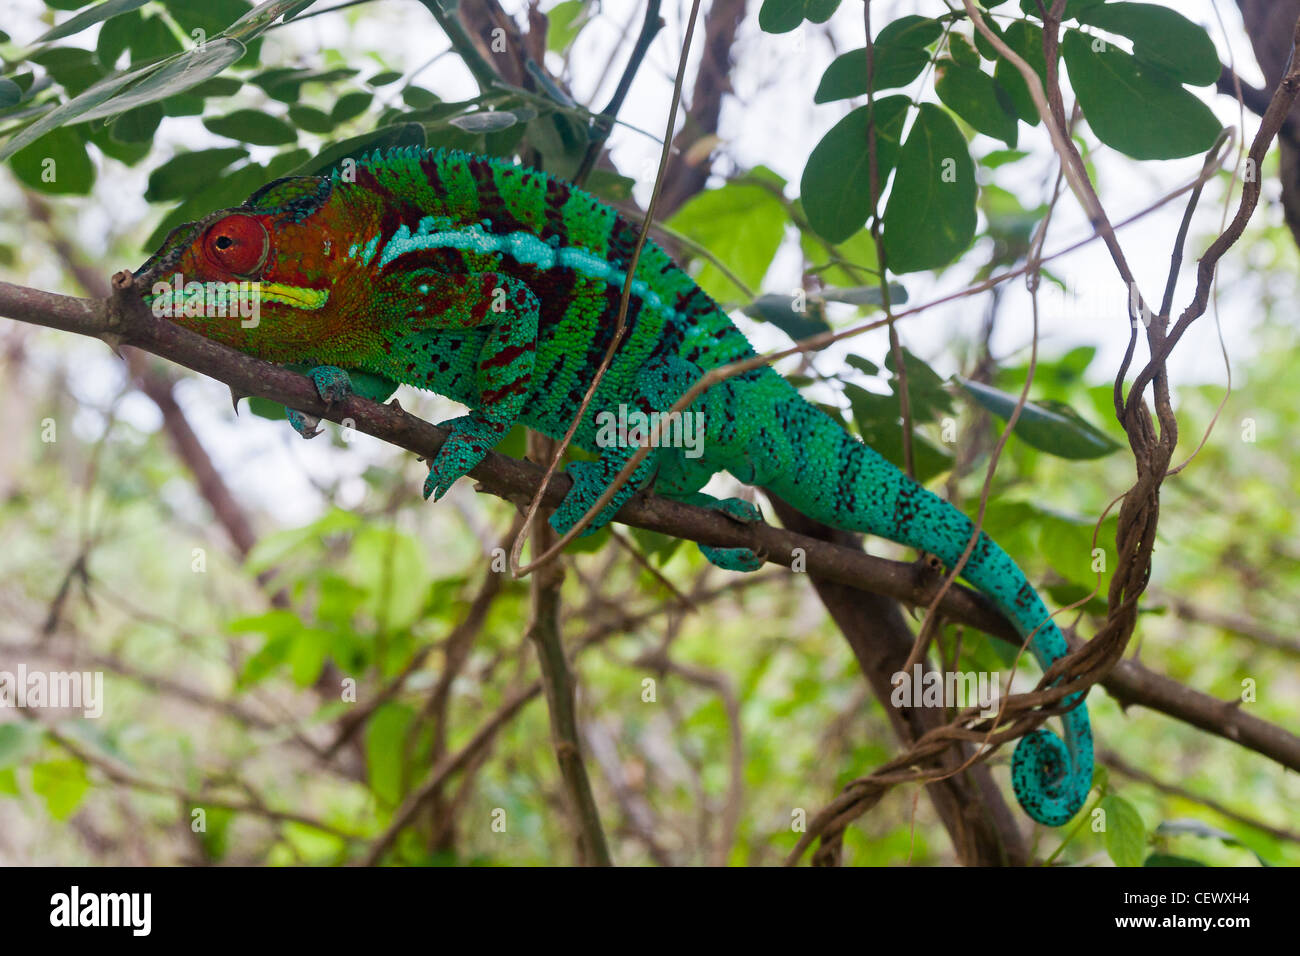 Panther chameleon in the north of Madagascar Stock Photo